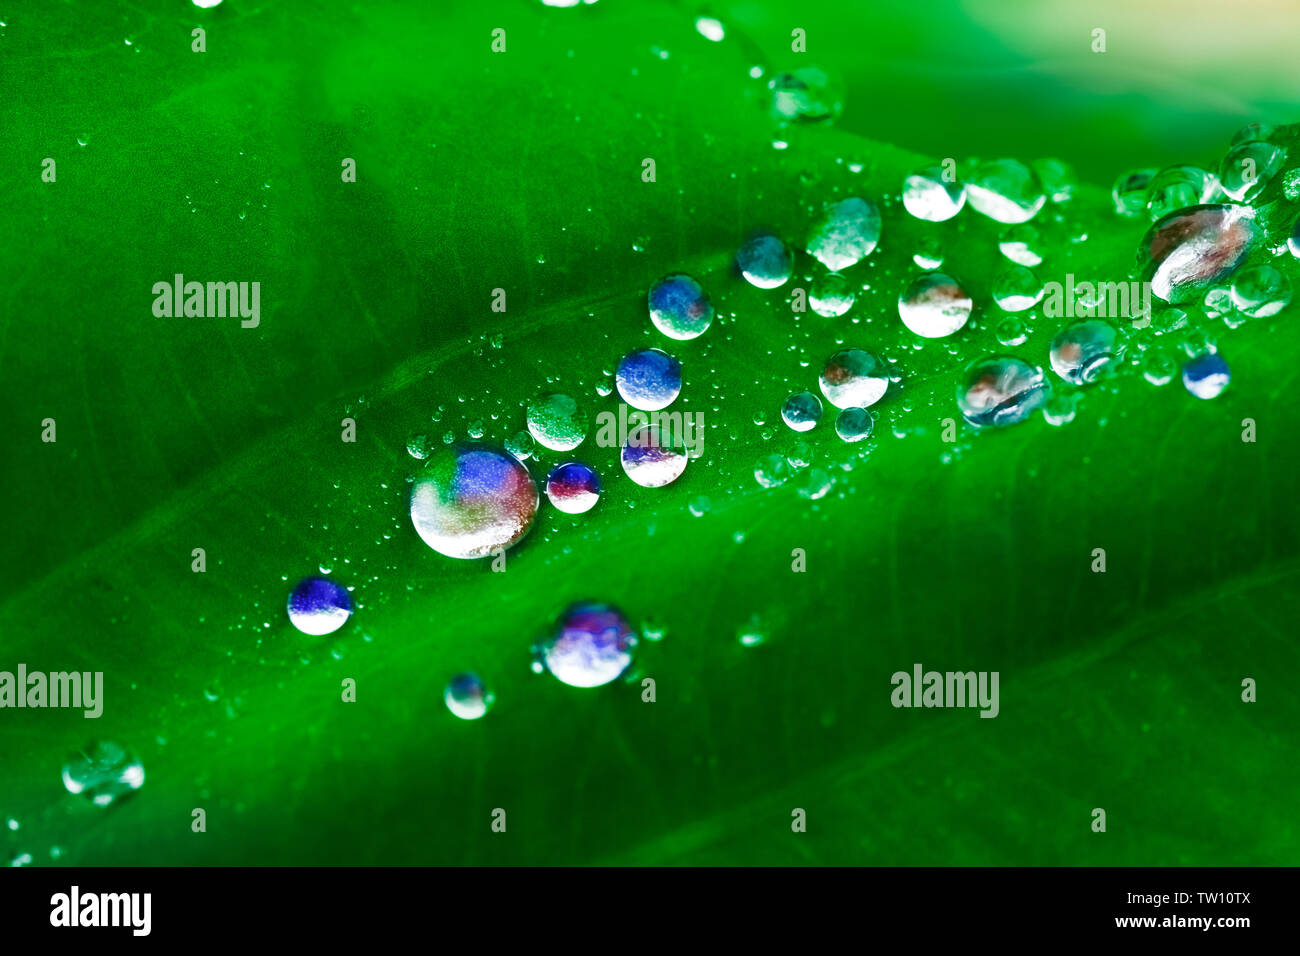 Colorful Water Drops On Green Leaves Stock Photo